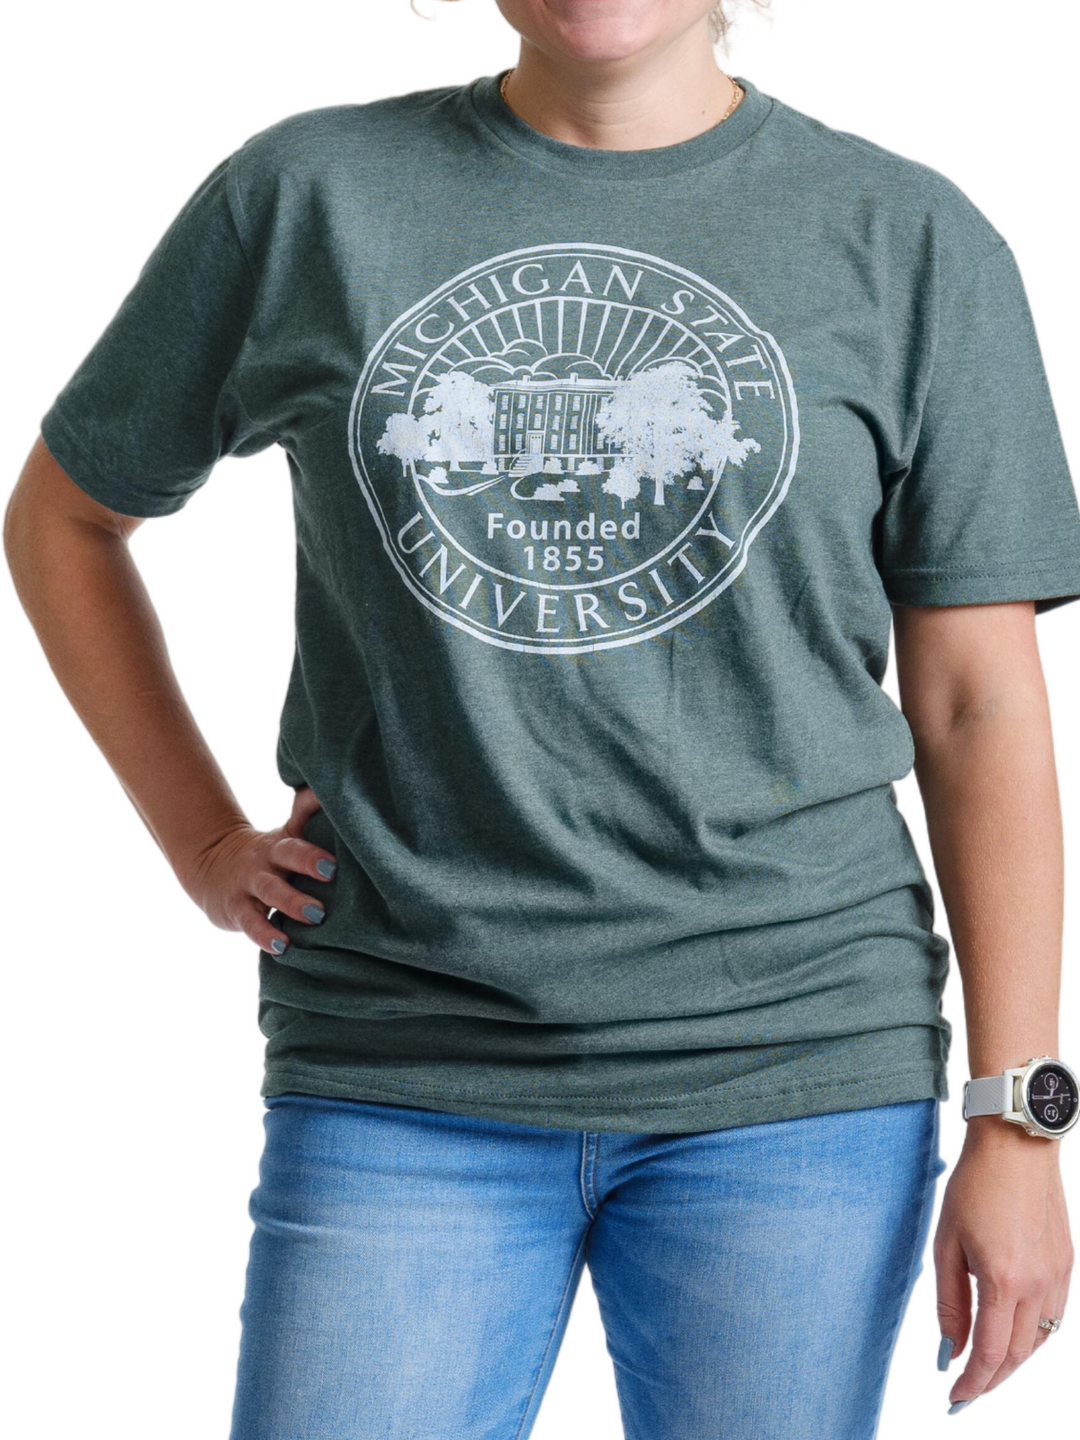 Michigan State University Official Seal forest green t-shirt - Nudge Printing